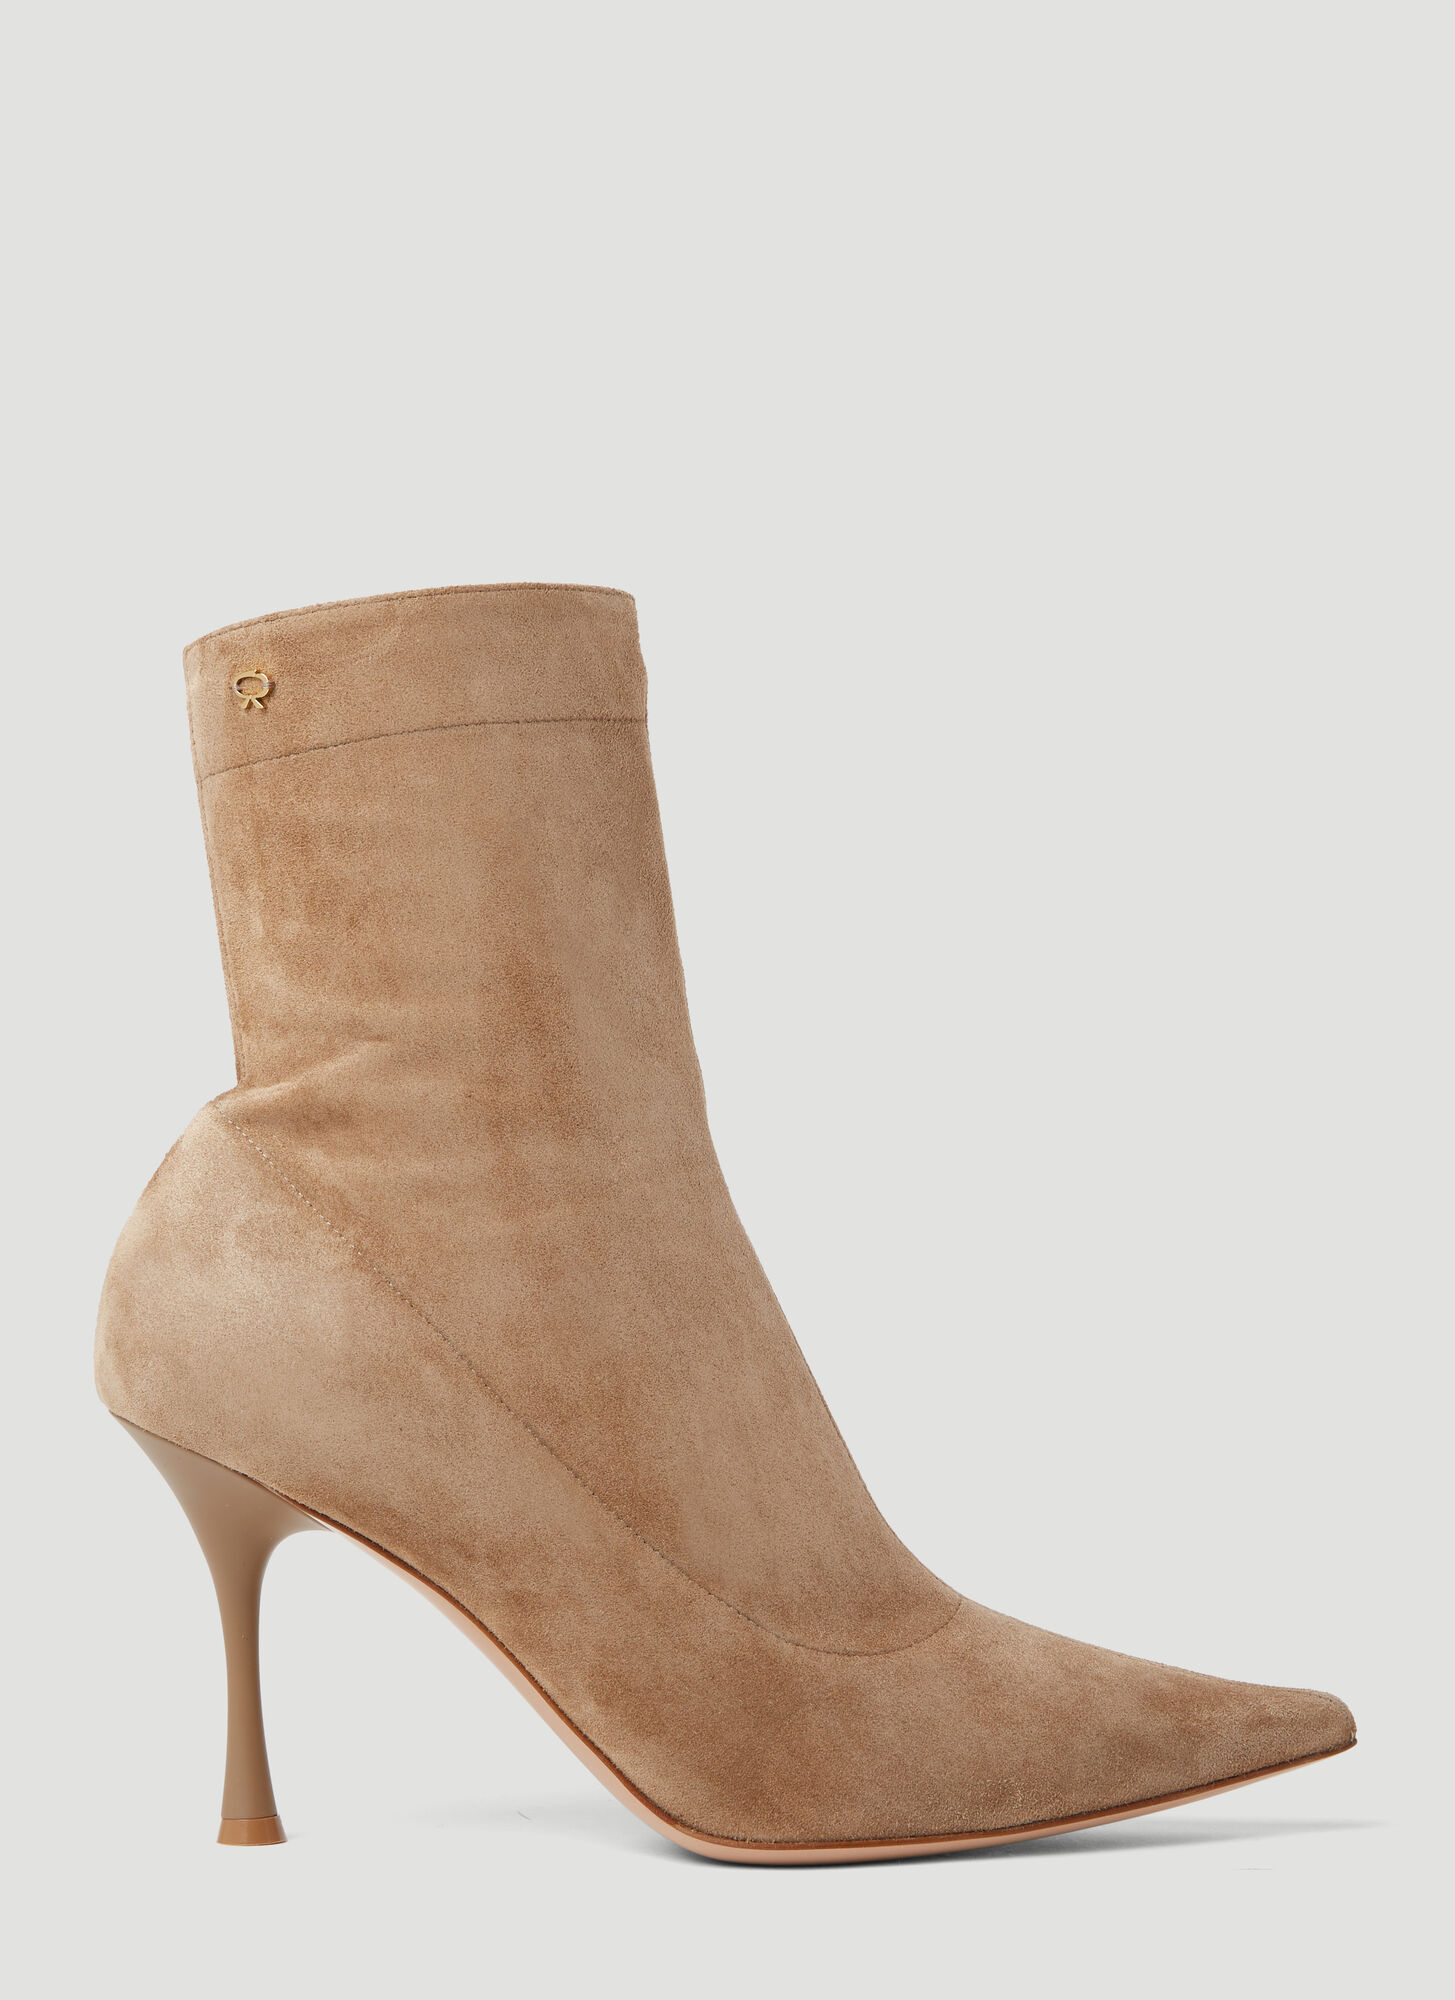 Shop Gianvito Rossi Dunn Suede High Heel Boots In Camel